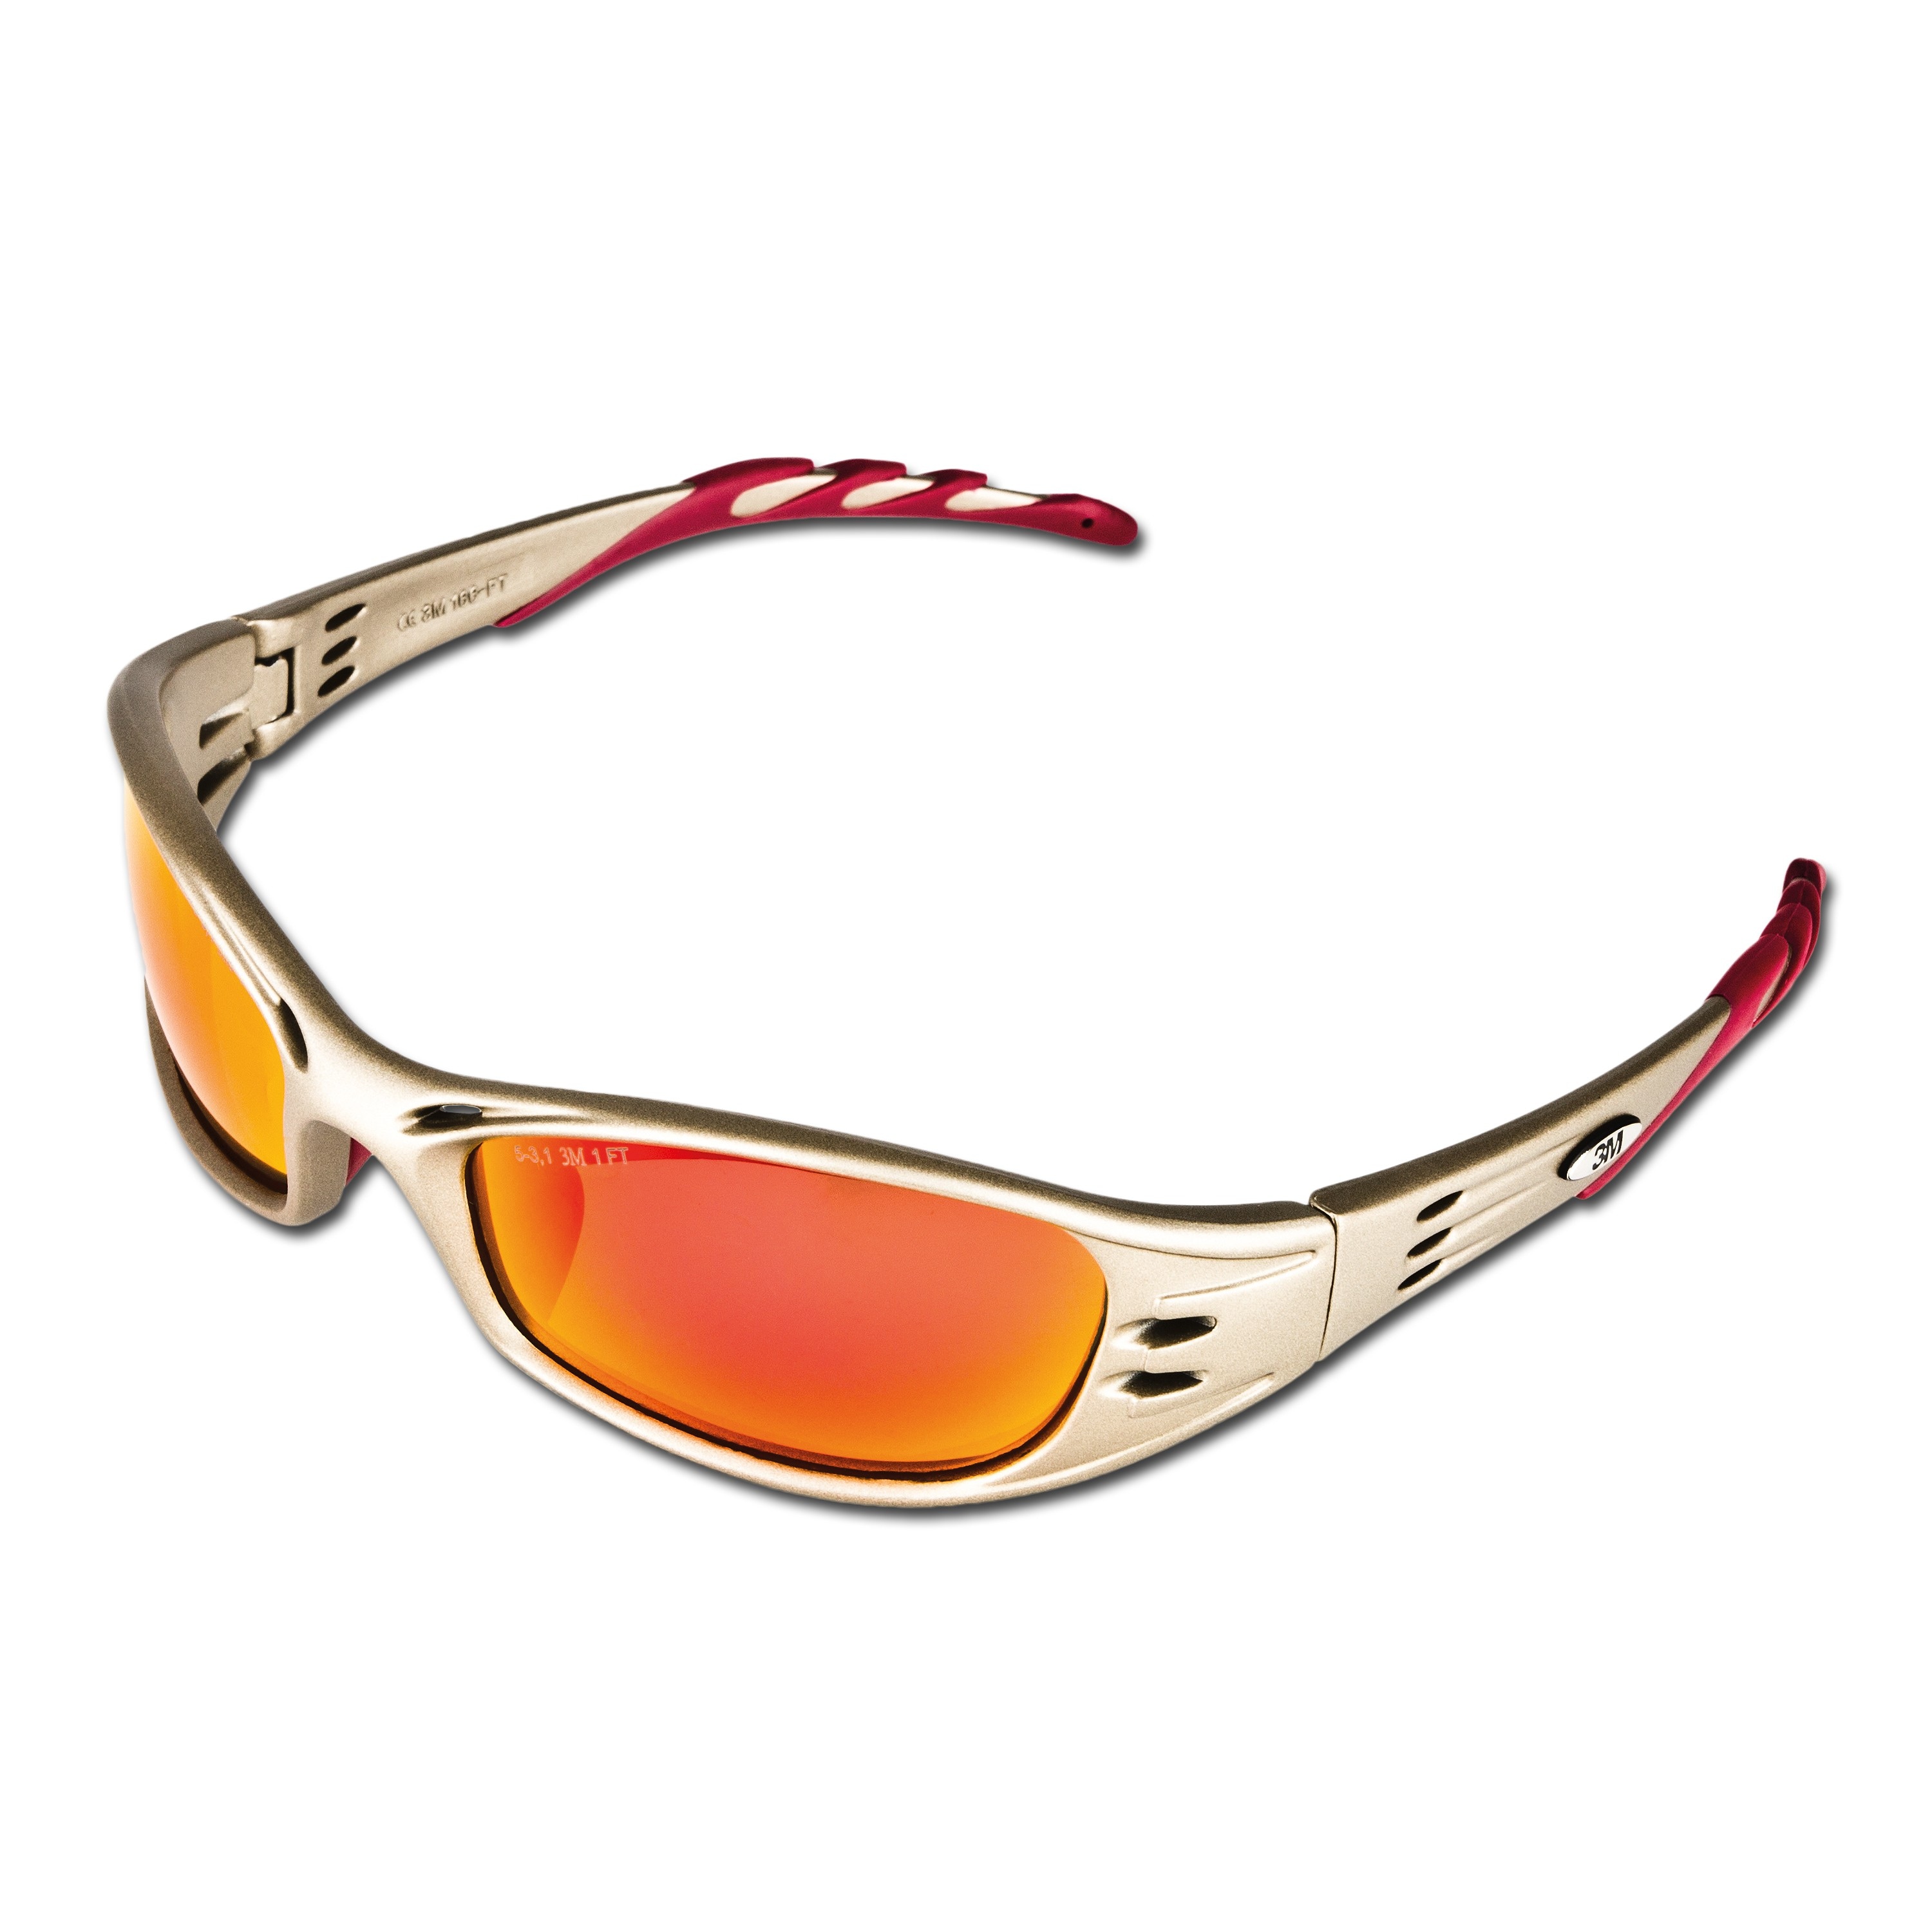 Safety Glasses 3M Fuel red mirrored 